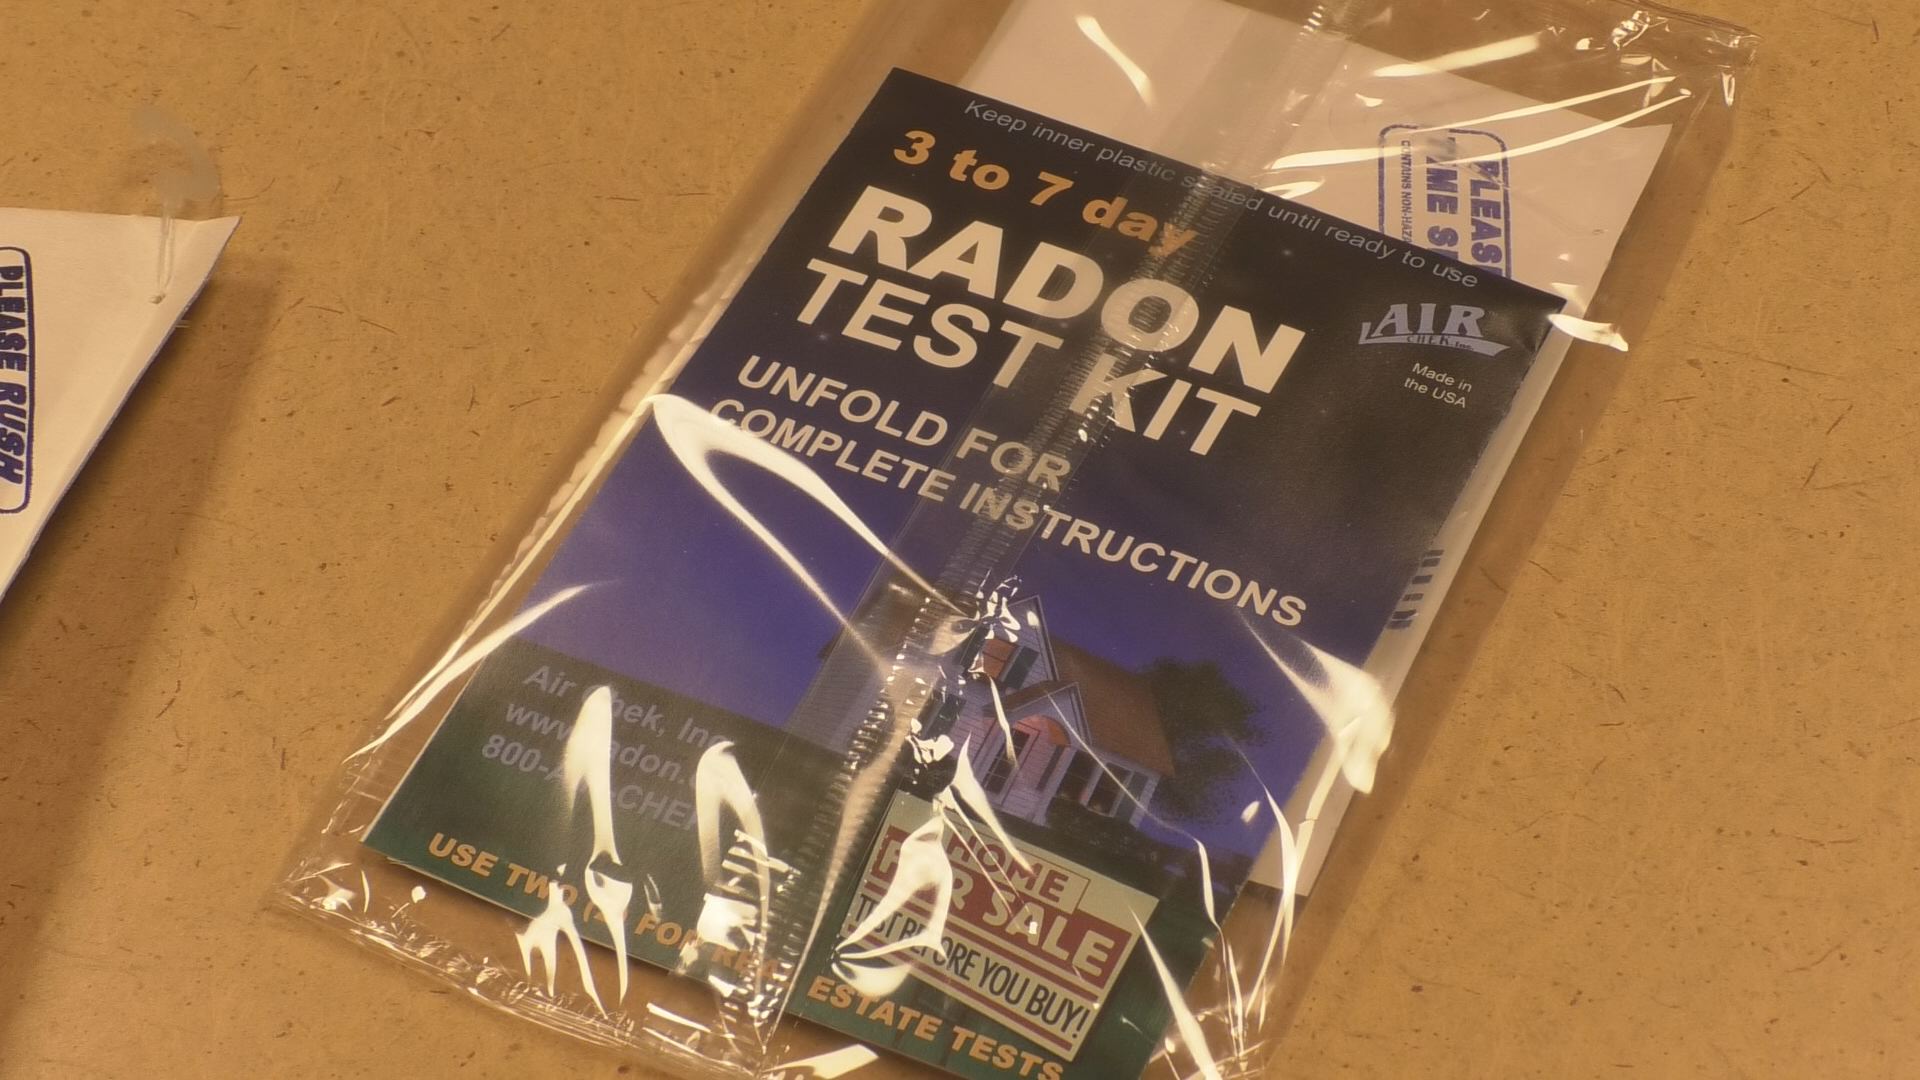 Free Radon Test Kits Available For Homeowners